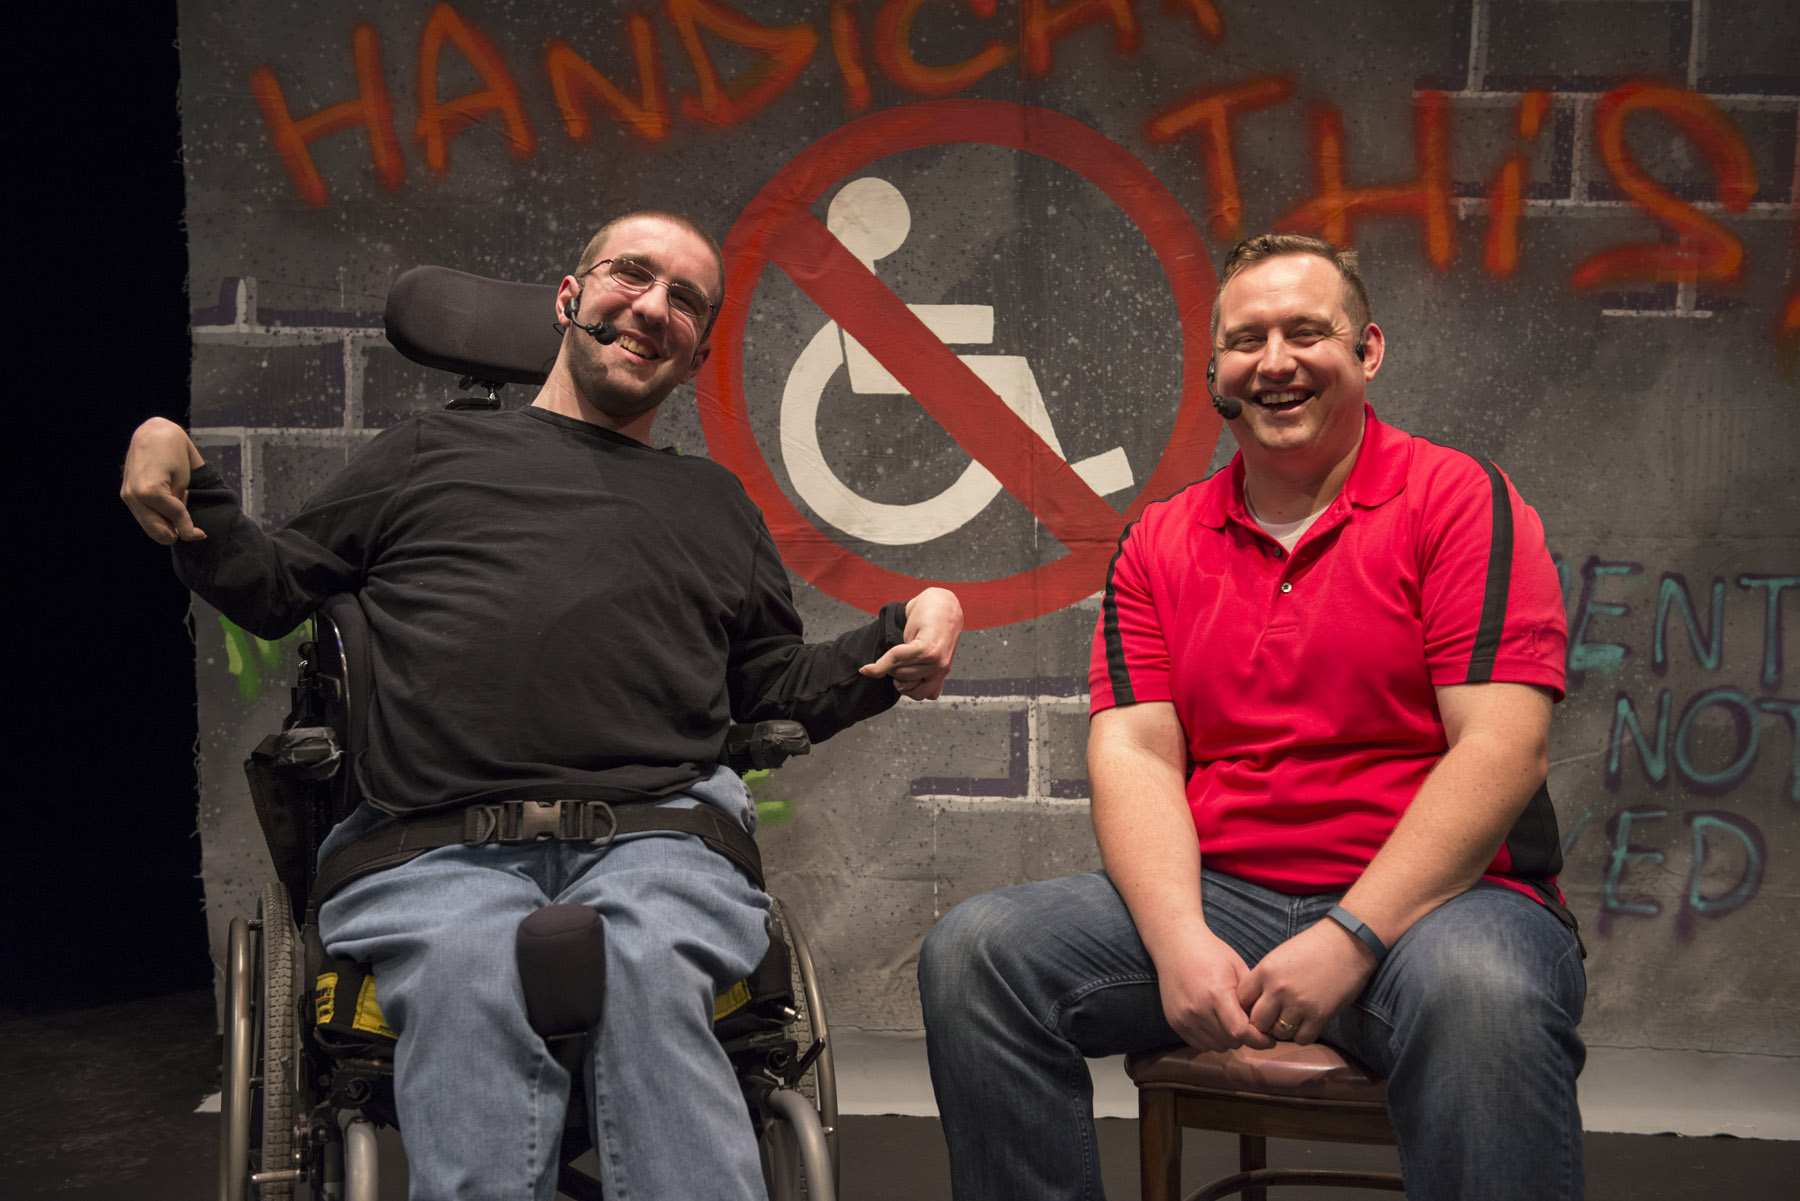 ONE WEEK ONLY! Step Up Productions Presents HANDICAP THIS! Written & Performed by Mike Berkson and Tim Wambach Directed by Denis Berkson January 21 – 25, 2015 at Stage 773 1 Step Up Productions continues its 2014-15 season with a special one-week engagement of the touching and humorous two-man show HANDICAP THIS! – part comedy, part storytelling and part insight on living with disabilities. Written and performed by nationally acclaimed duo Mike Berkson and Tim Wambach, HANDICAP THIS! is inspired by the original script by Molly Mulcrone and directed by Denis Berkson. This special collaboration will play January 21 – 25, 2015 at Stage 773, 1225 W. Belmont Ave. in Chicago. Tickets are available at www.stepupproductions.org or www.stage773.com, by calling (773) 327-5252 or in person at the Stage 773 Box Office. 